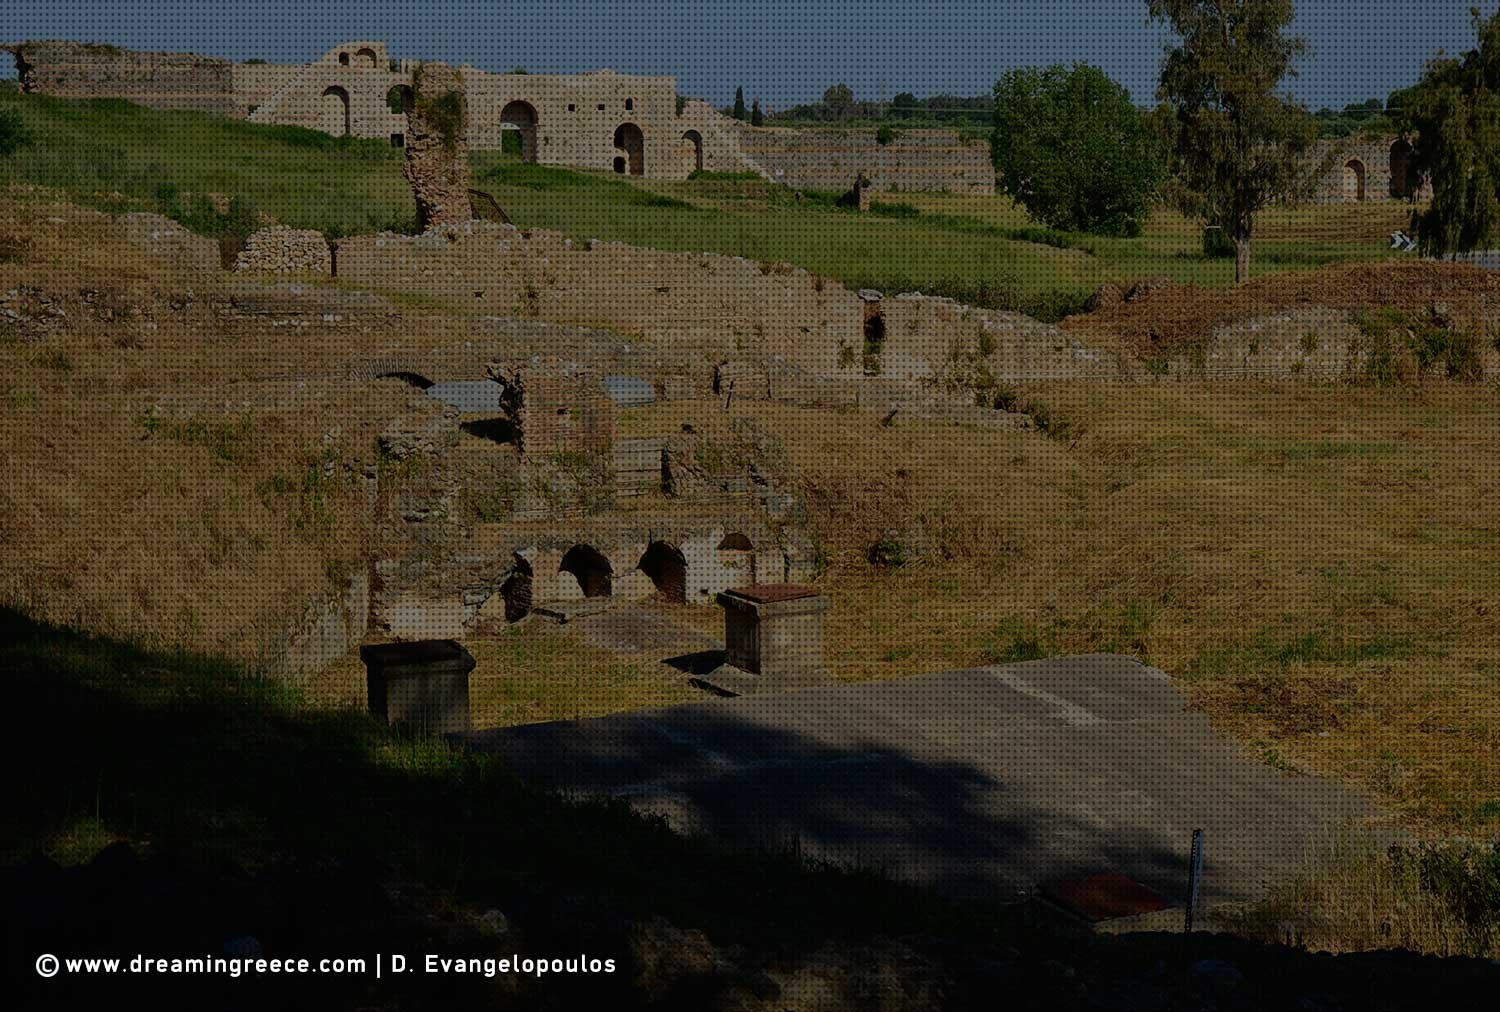 Archaeological Site of Nikopolis Preveza. Archaeological sites in Greece.